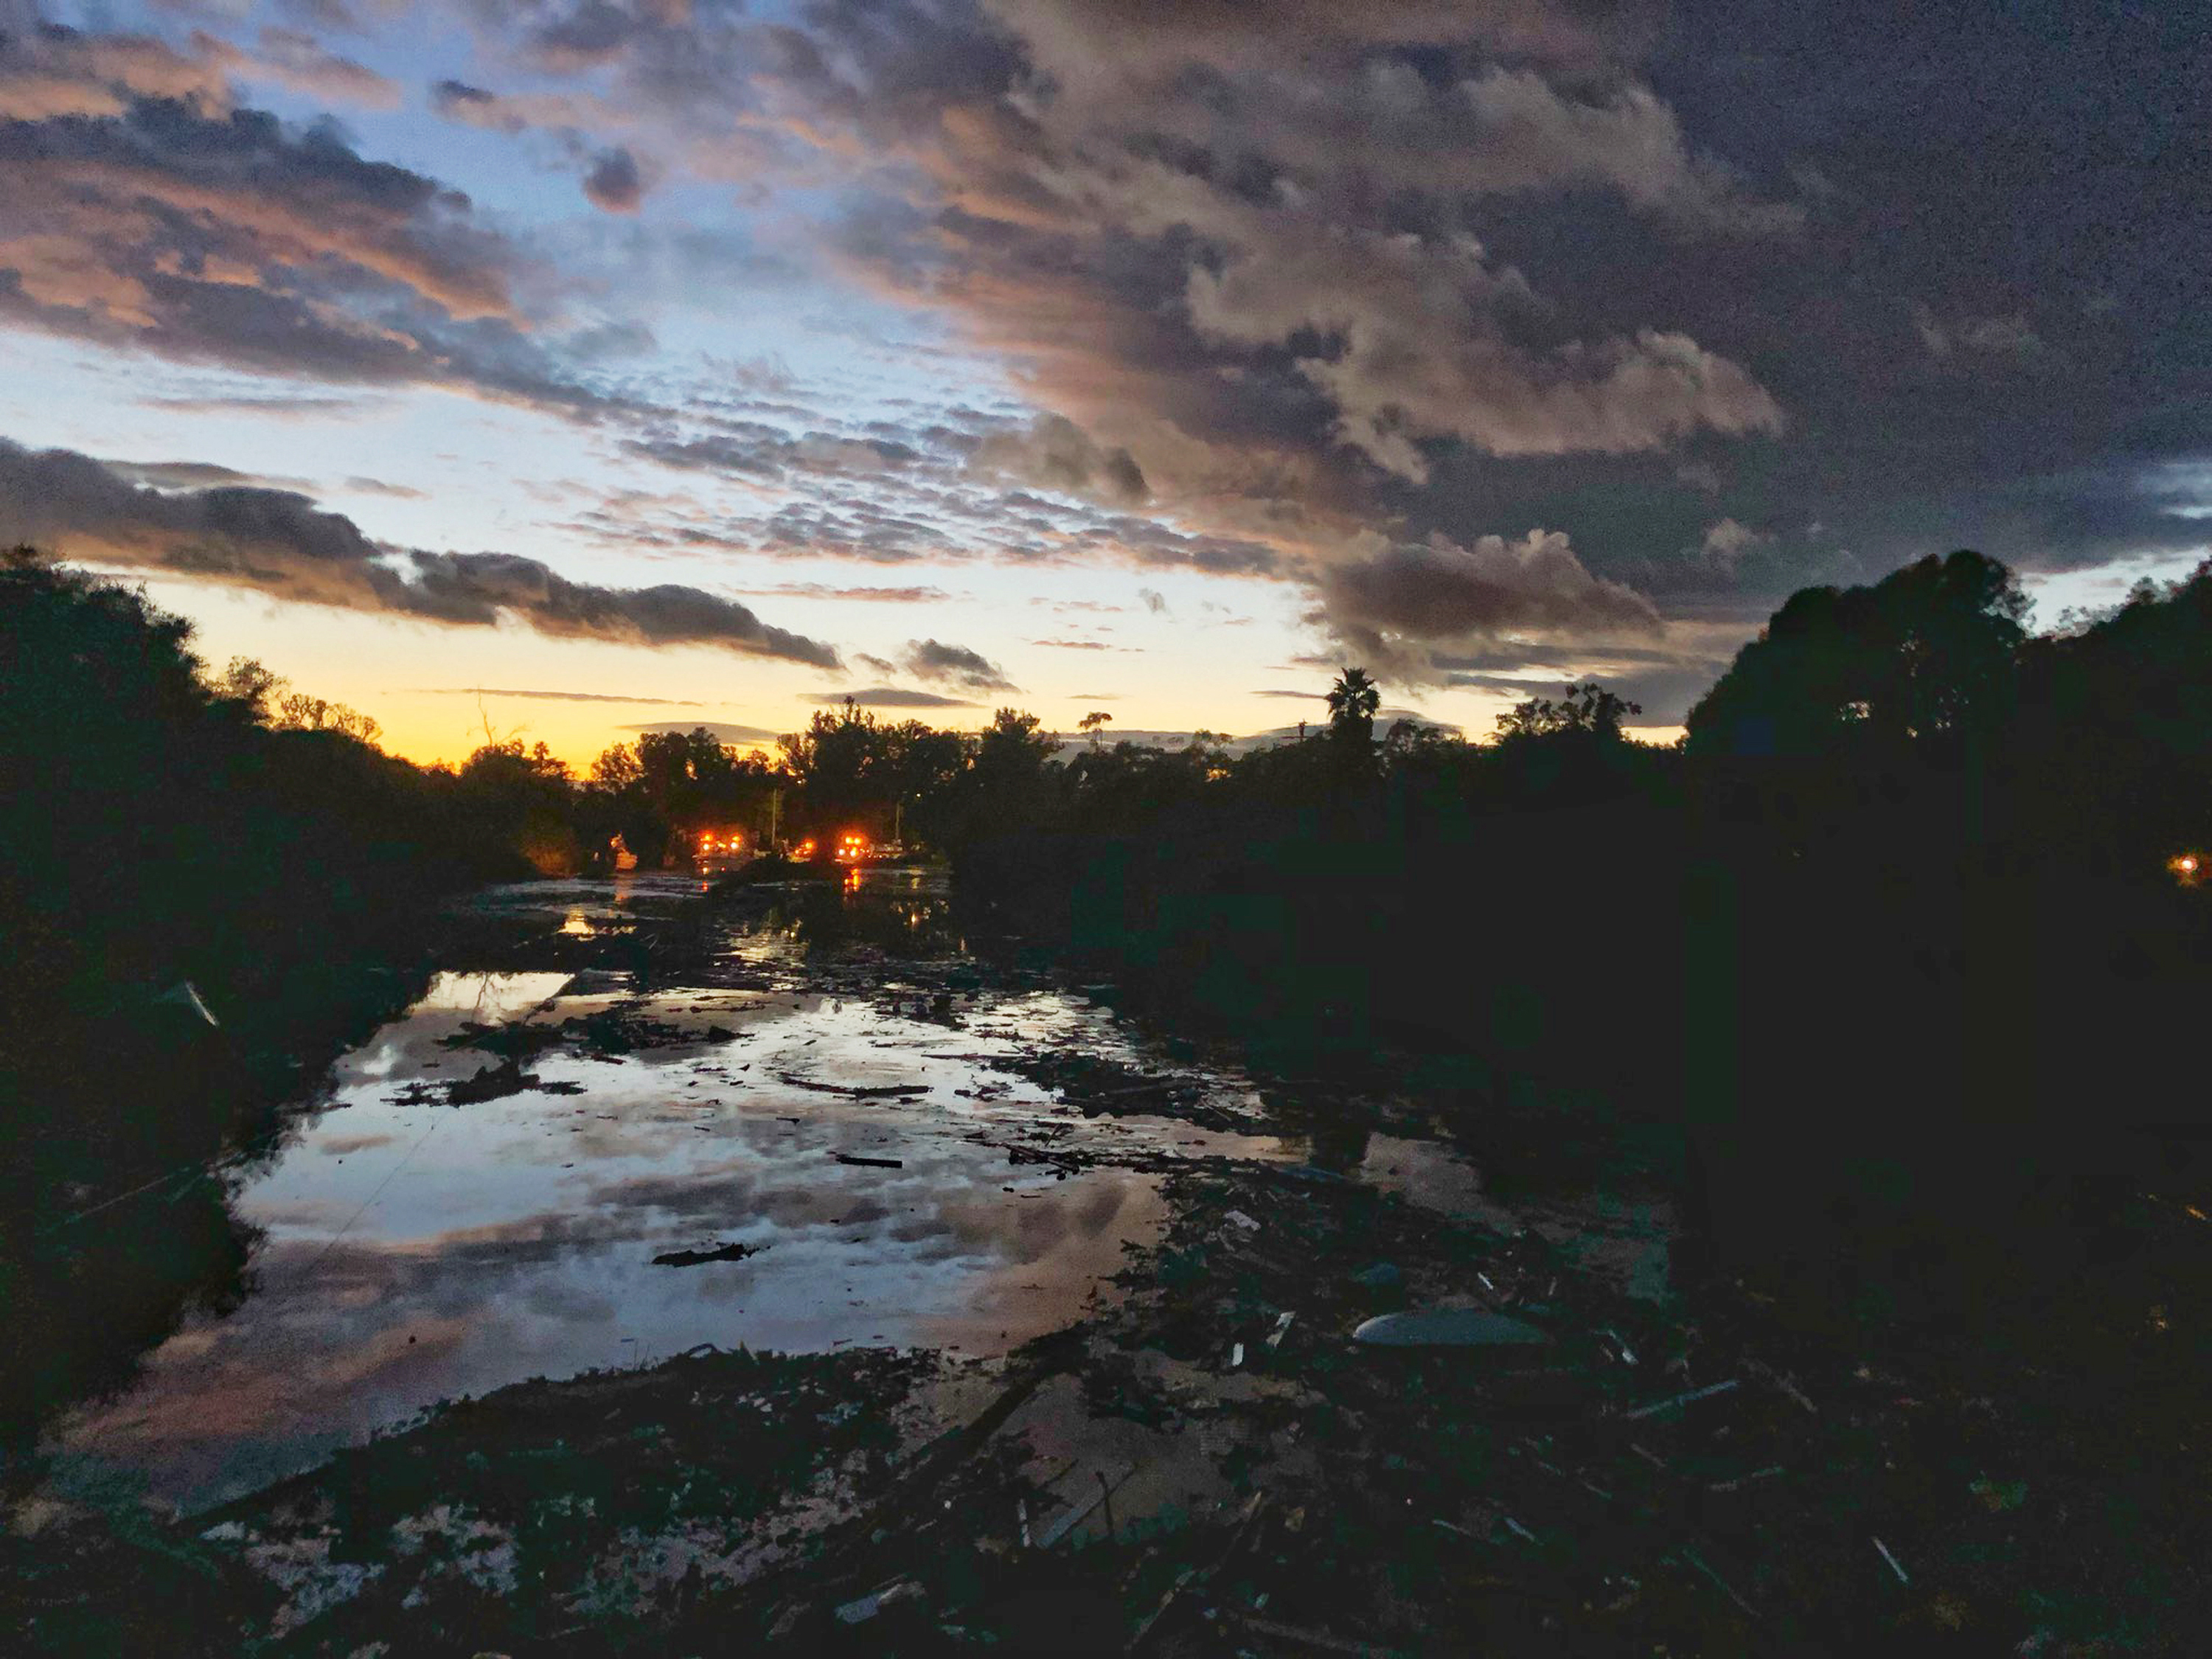 This photo provided by the Santa Barbara County Fire Department shows the sun setting over the flooded US 101 Freeway at Olive Mill Road, which remains flooded with runoff water from Montecito Creek in Montecito, Calif., Tuesday, Jan. 9, 2018. Several homes were swept away before dawn Tuesday when mud and debris roared into neighborhoods in Montecito from hillsides stripped of vegetation during the Thomas wildfire. (Mike Eliason/Santa Barbara County Fire Department via AP)